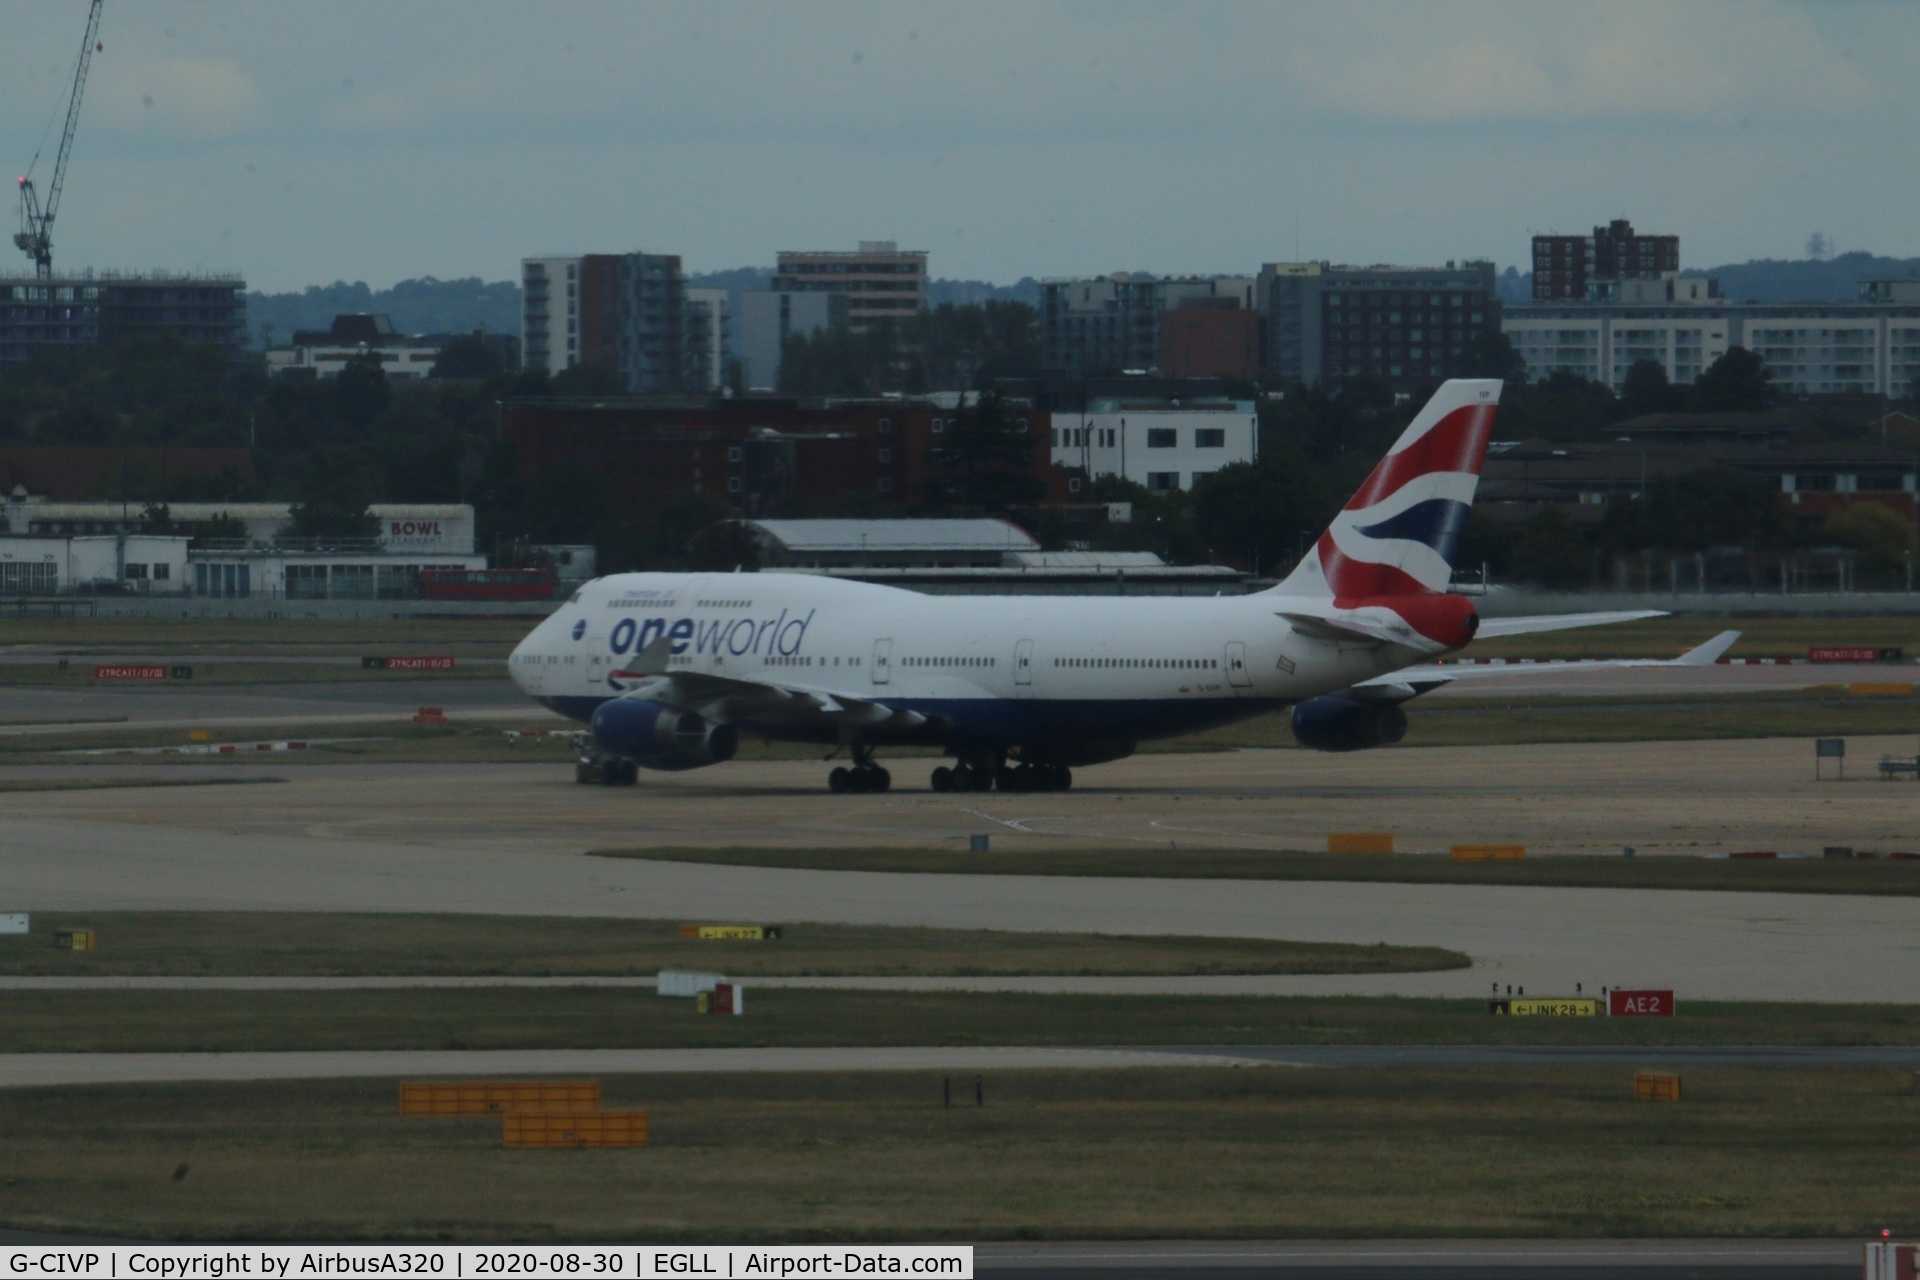 G-CIVP, 1998 Boeing 747-436 C/N 28850, Withdrawn from service being towed around the BA maintenance area at LHR